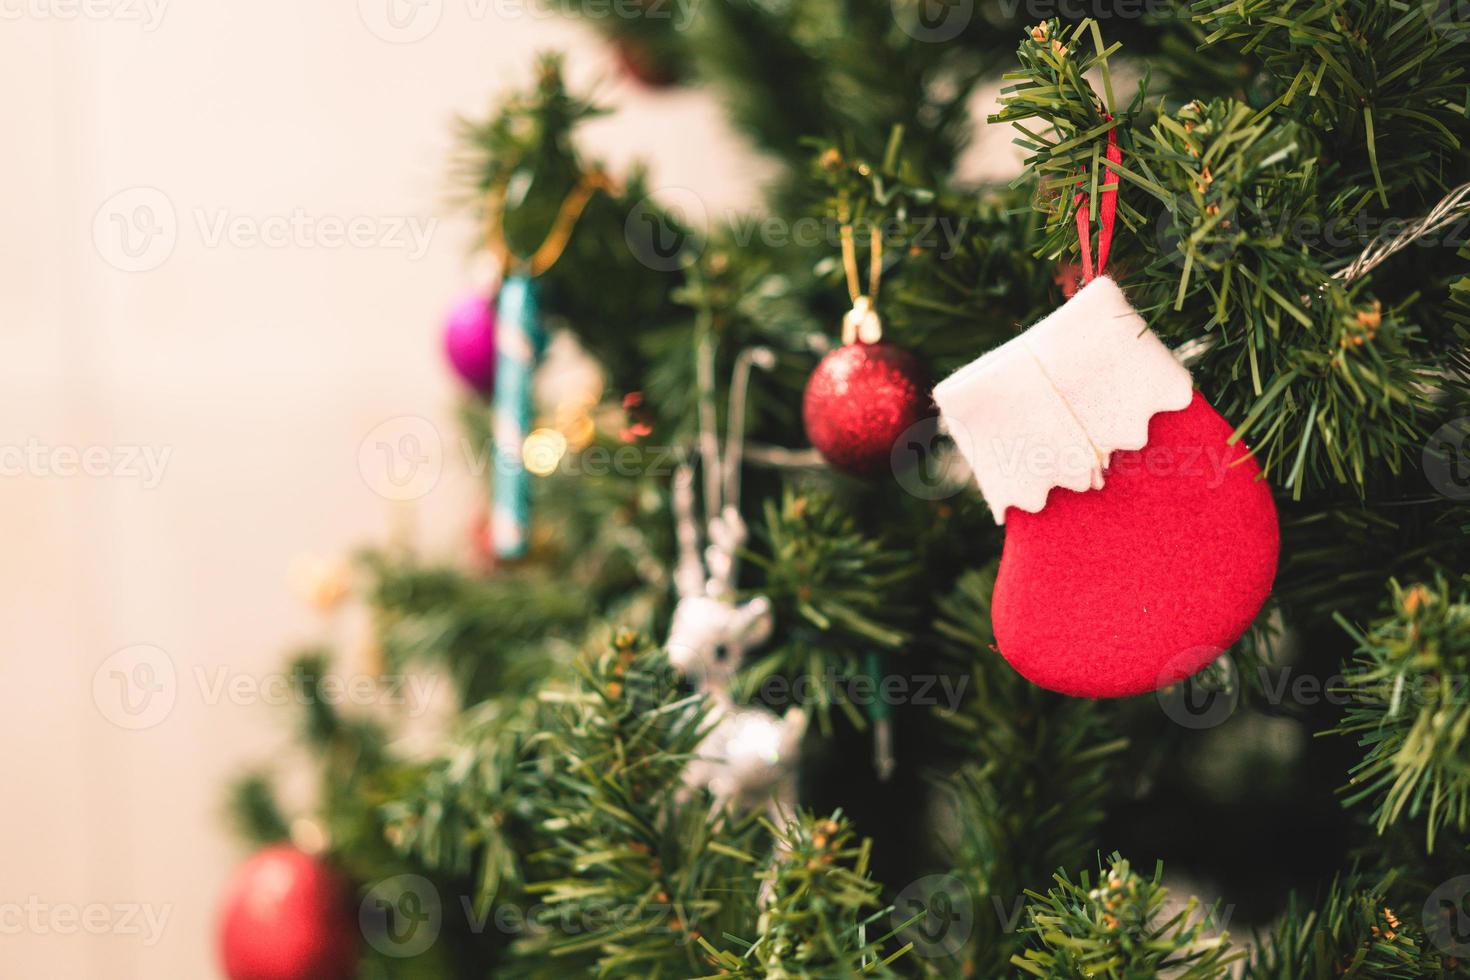 Ornaments for decoration on Christmas tree photo